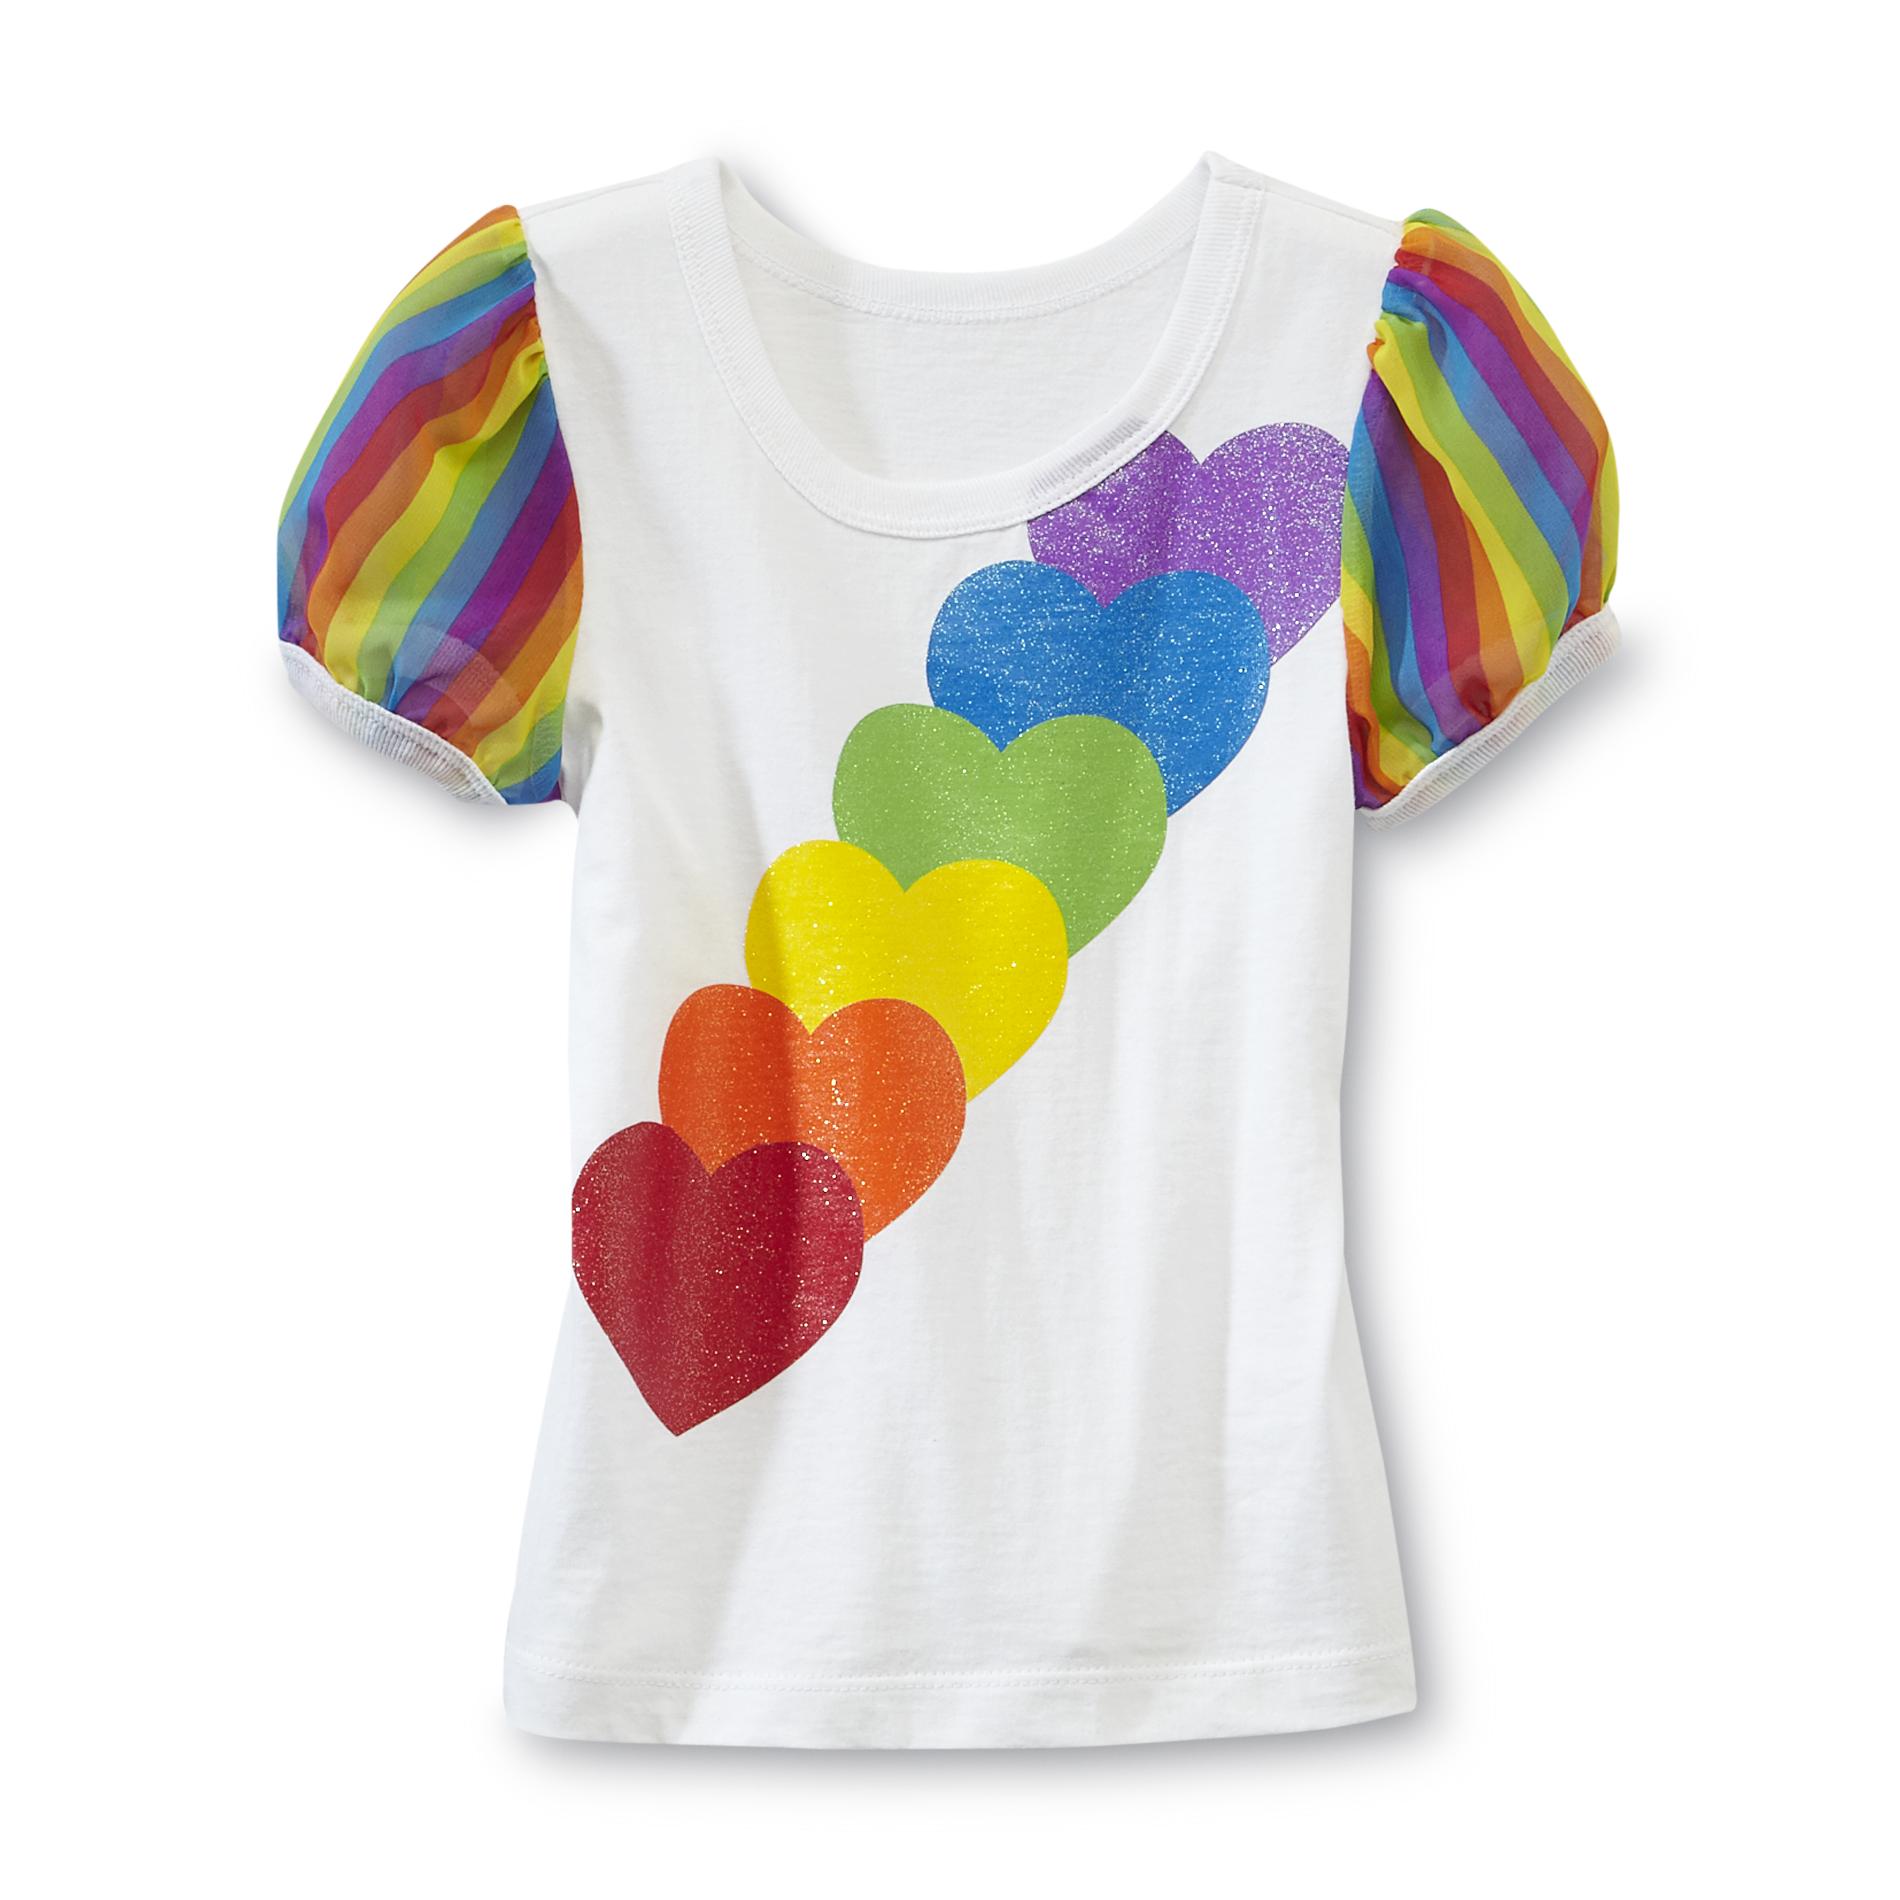 Piper Infant & Toddler Girl's Heart & Rainbow Top